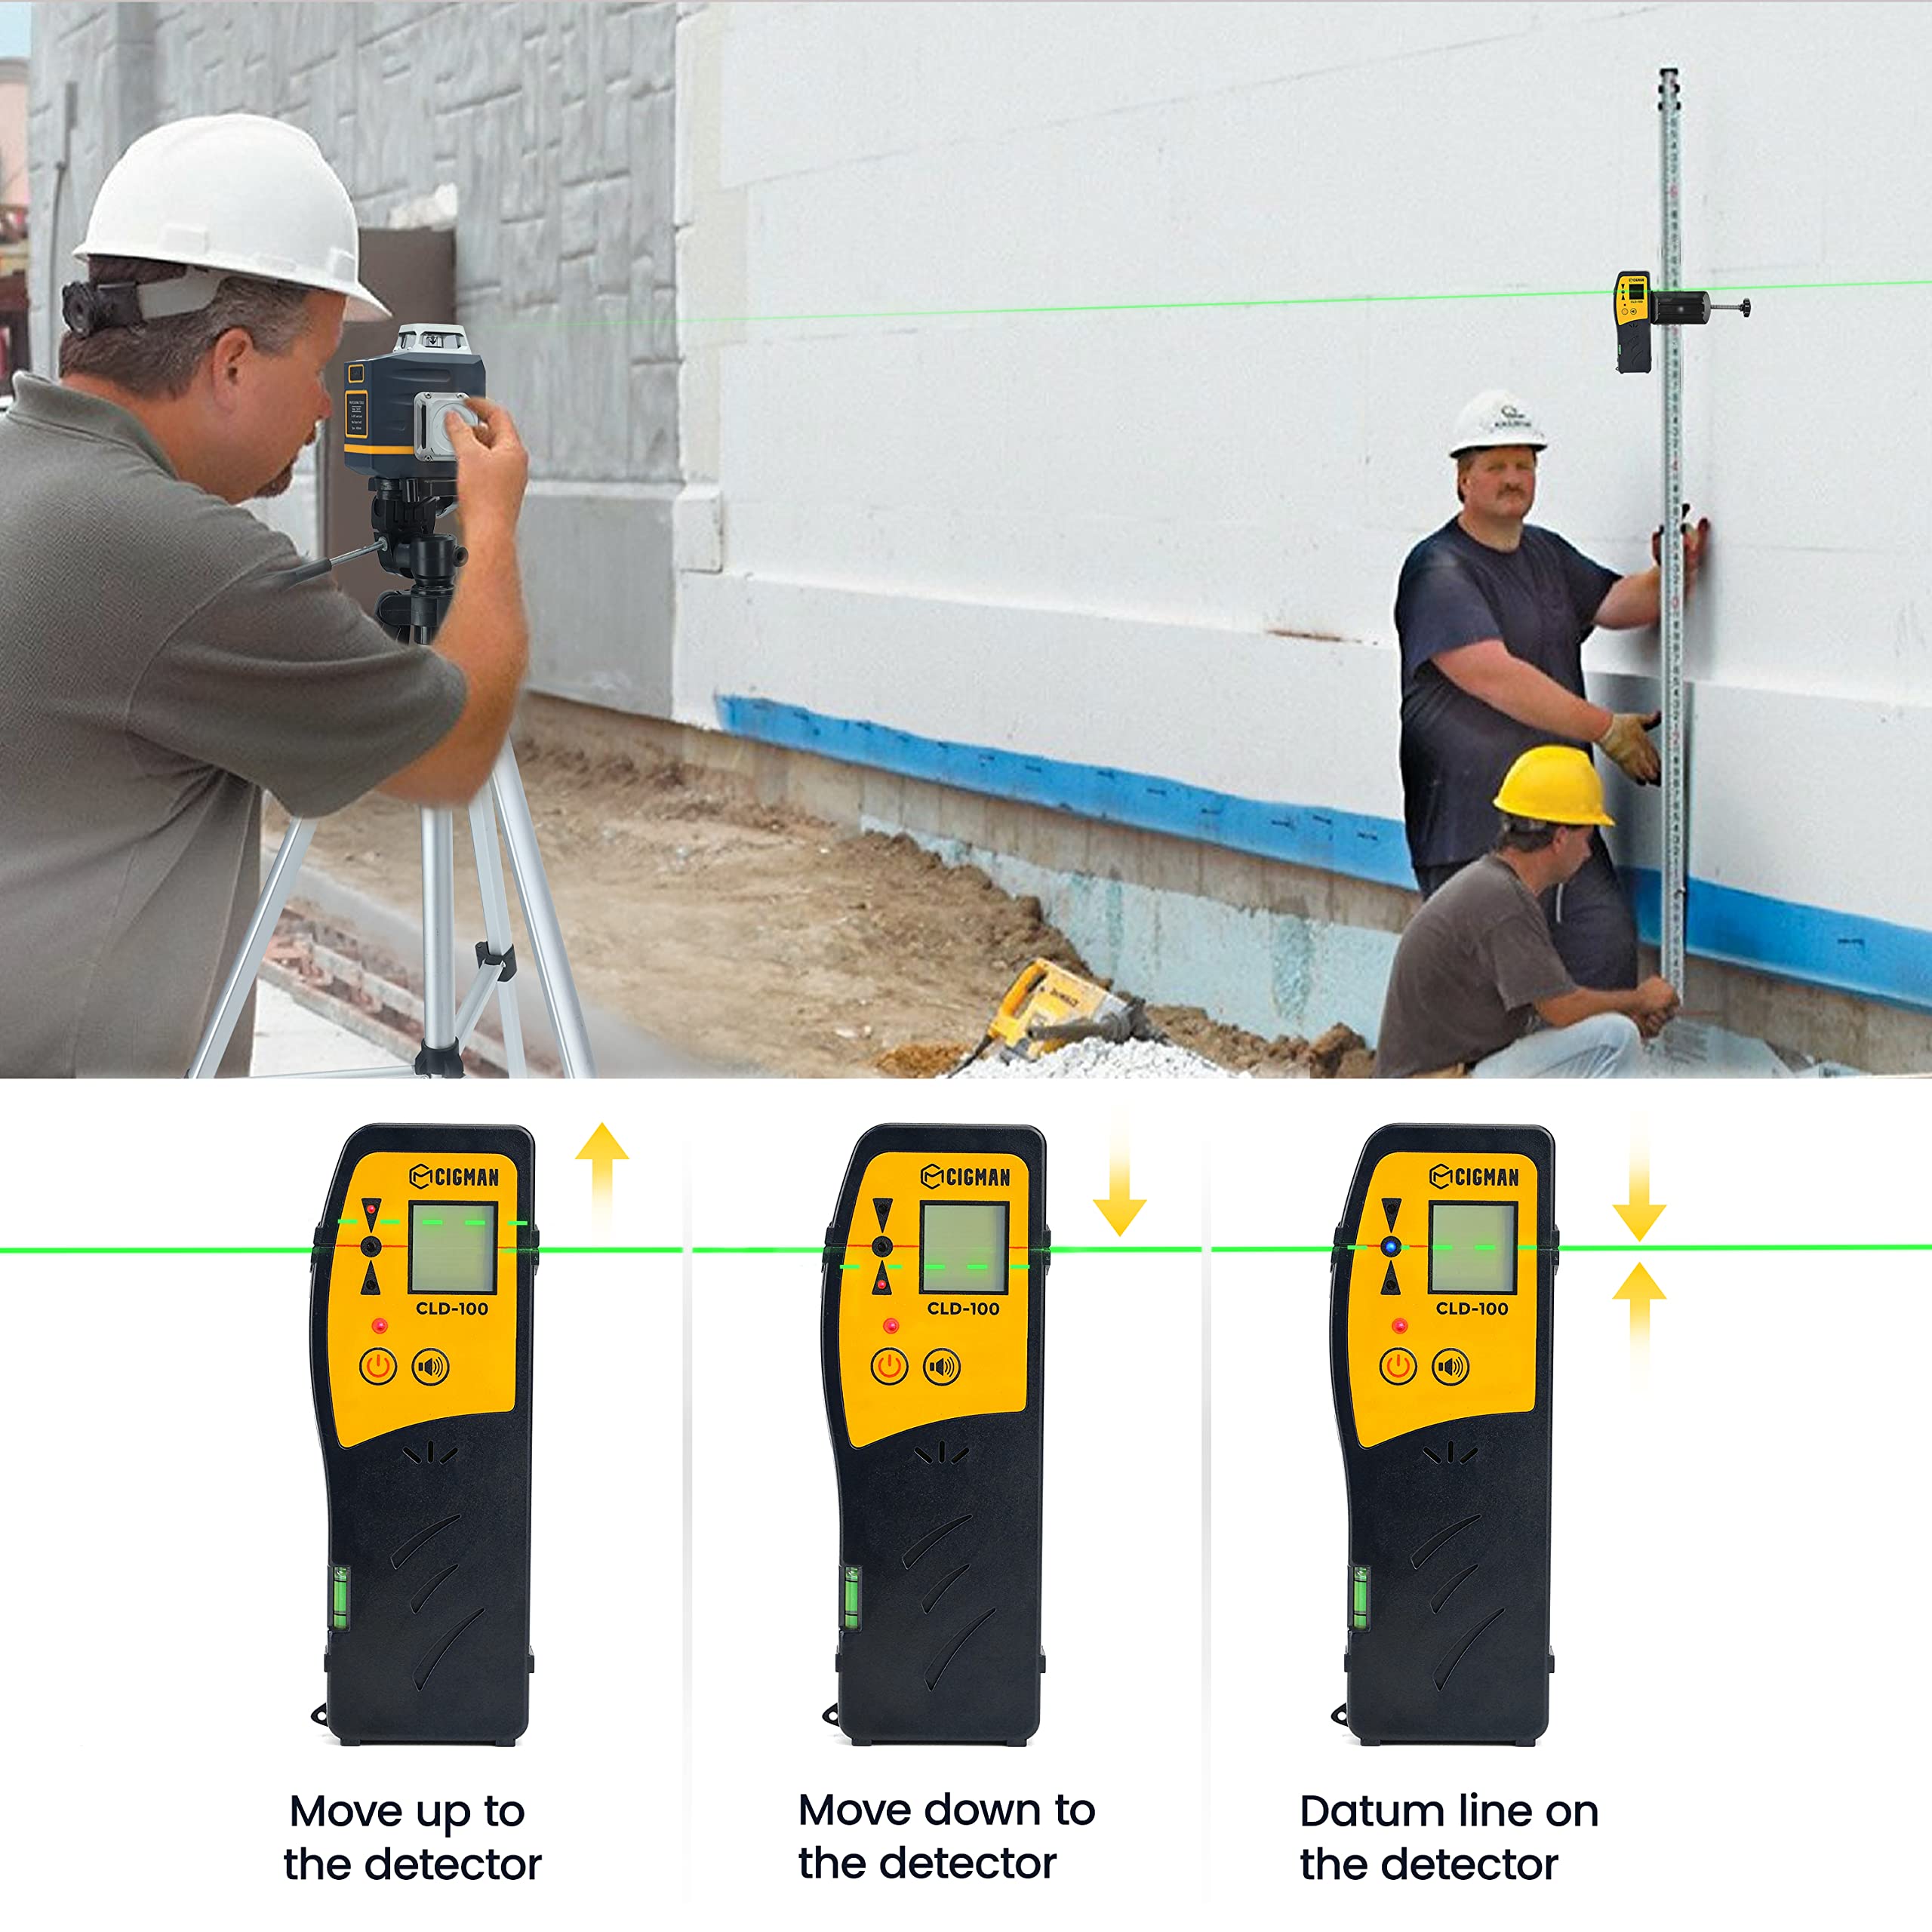 CIGMAN CLD-100 Laser Detector for Line Laser Level, Green Laser and Red Beam Receiver for Pulsing Line Lasers Up to 165ft, Digital Laser Receiver with Three-Sided LED Displays, Rod Clamp Included